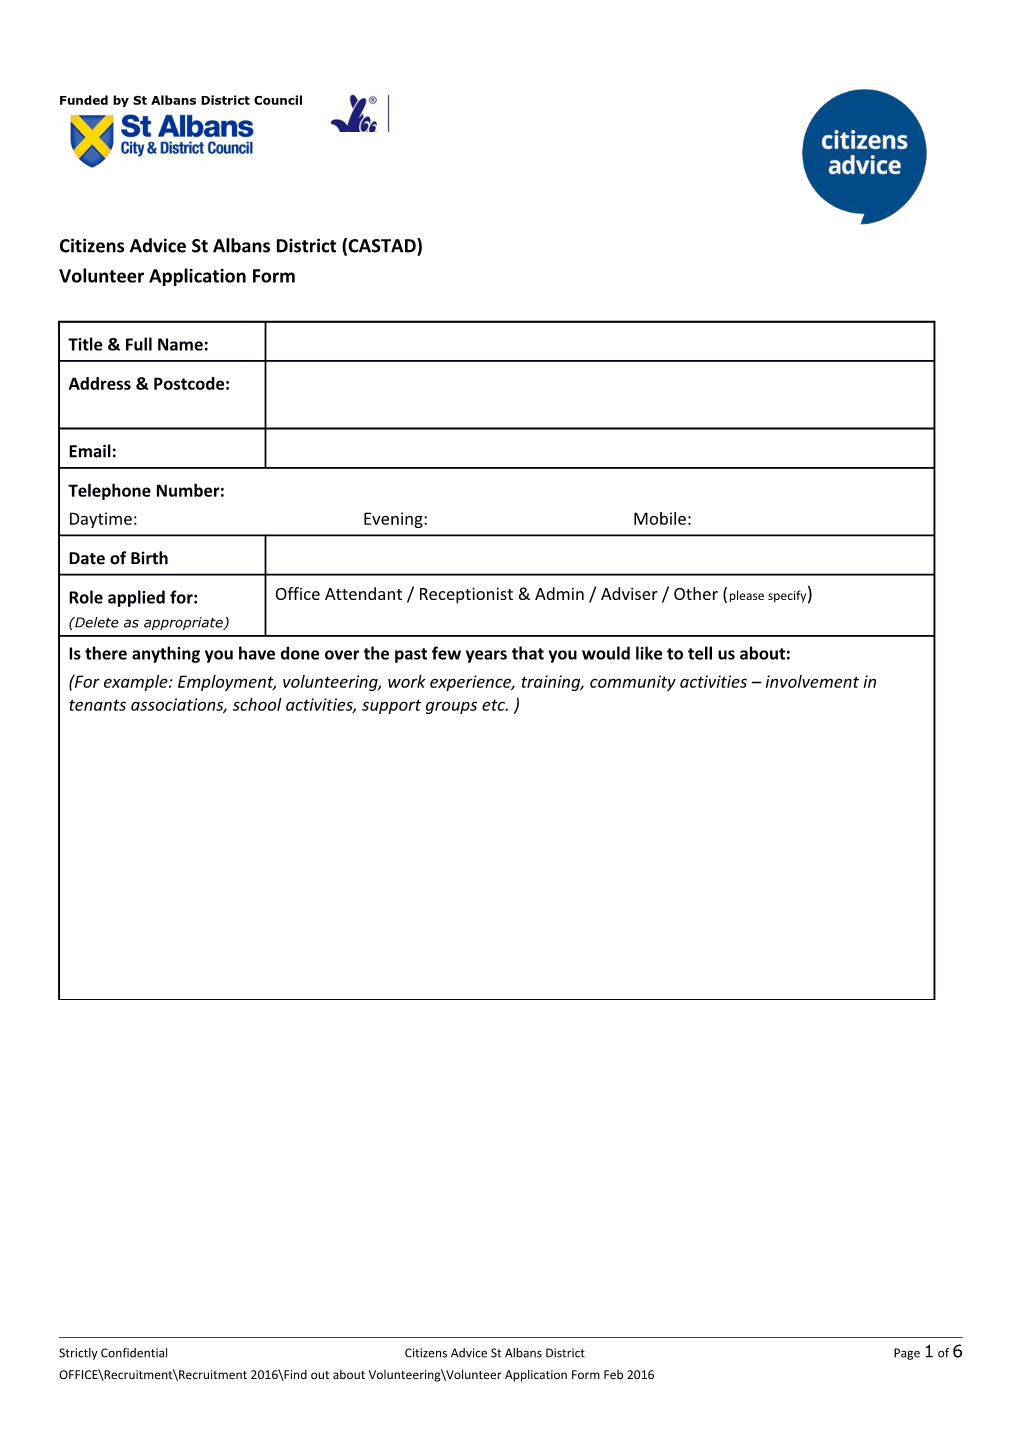 ASW Application Form